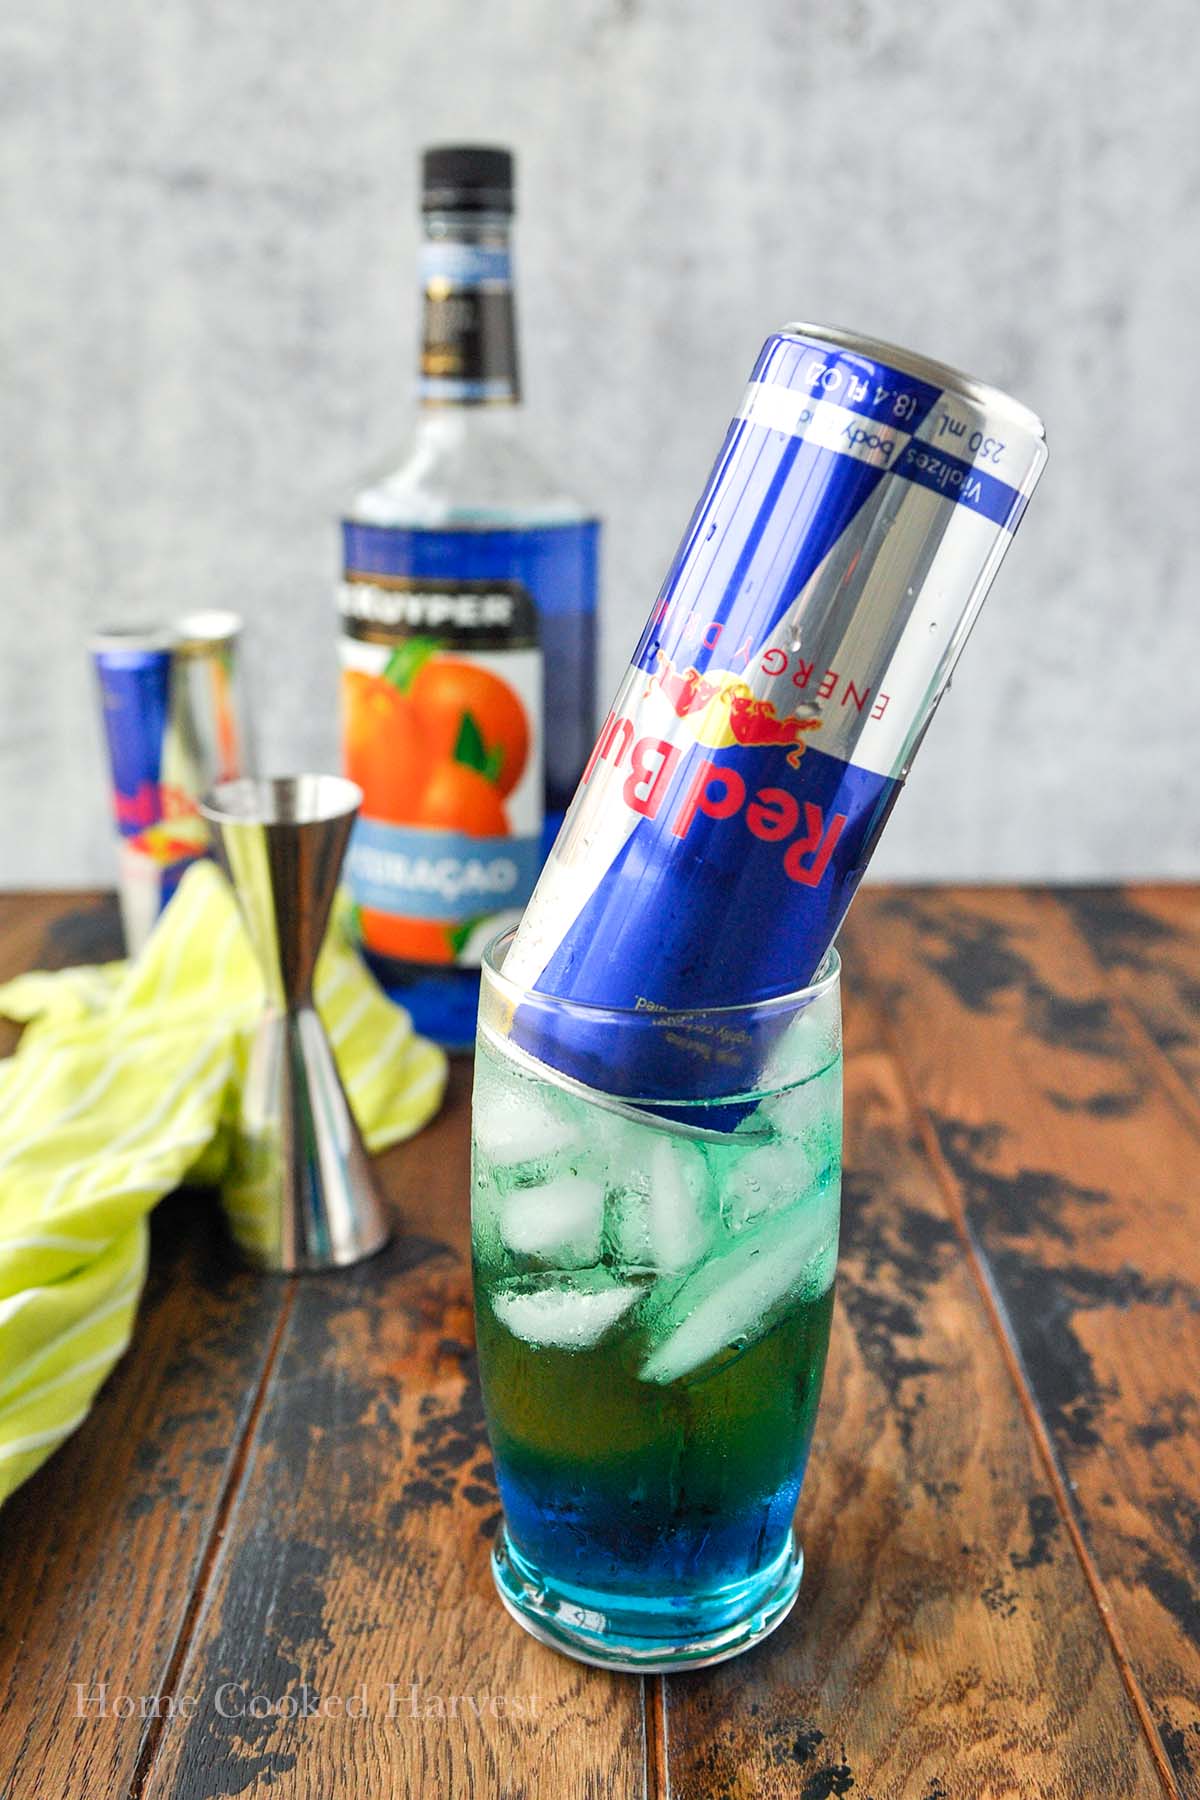 An upside down can of Red Bull in a glass of Irish trash can. Bottle of alcohol, a Red Bull, and jigger in the back ground.